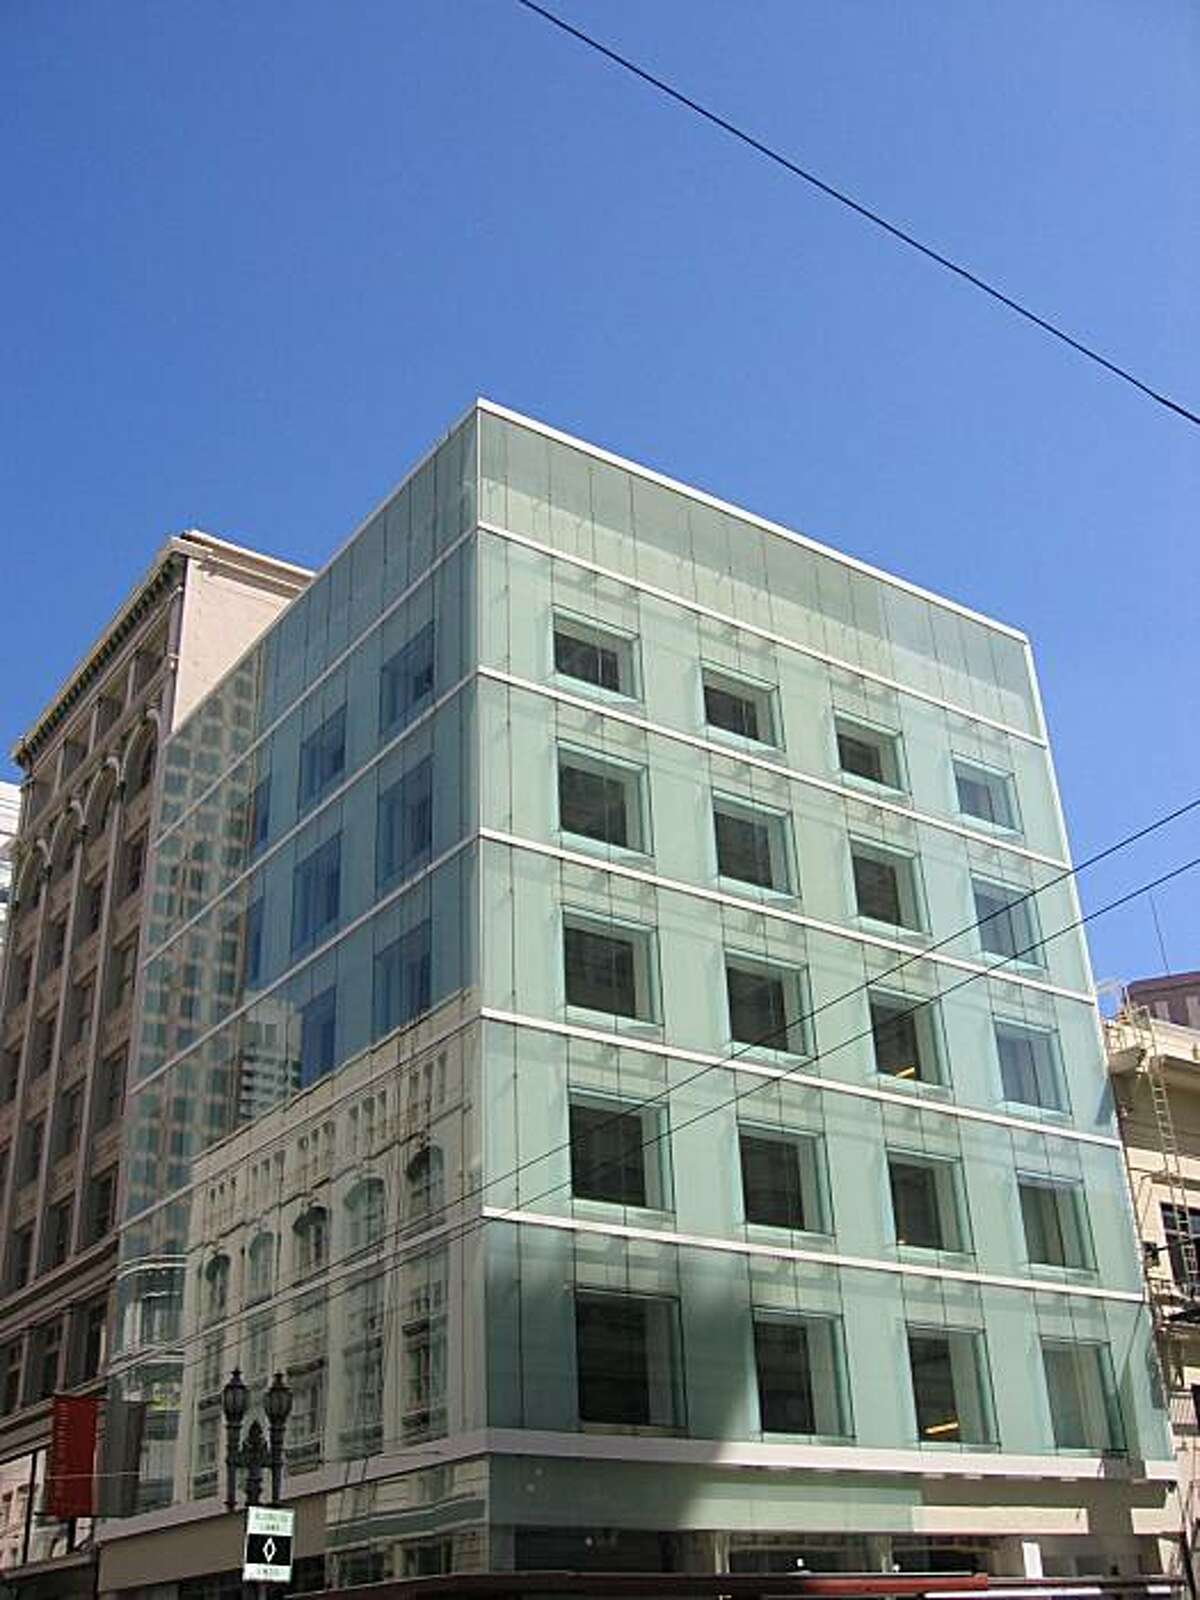 A nondescript commercial building from the 1950s at 185 Post St. has received a stylish renovation that includes a glass skin outside the original brick walls. The design by Brand Allen Architects received a 2008 Honor Award for Architecture from the San Francisco chapter of the American Institute of Architects